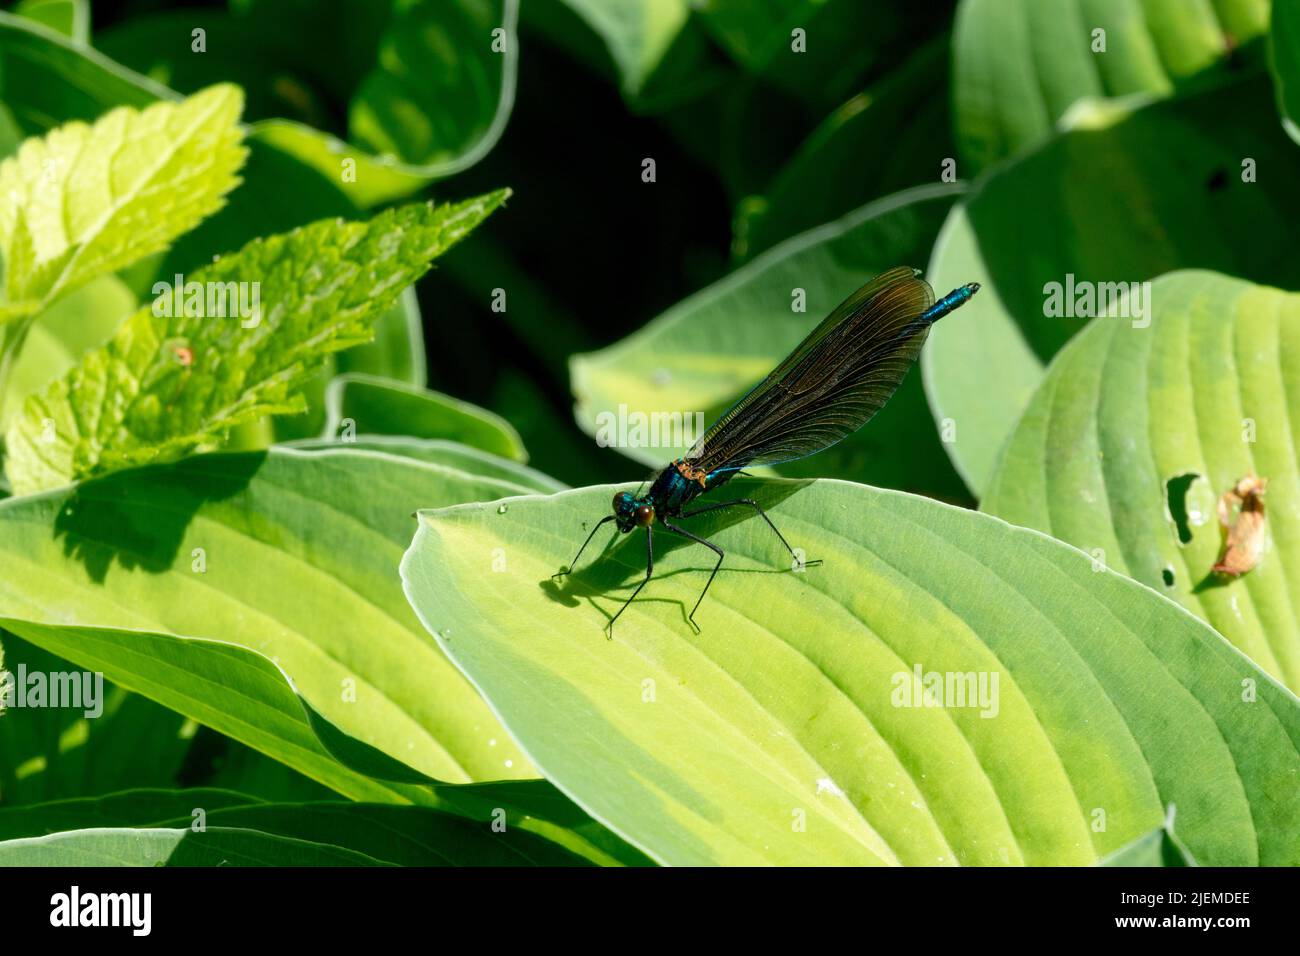 Dragonfly on leaf Hosta 'Gold Rush' Garden Friendly Insect Stock Photo